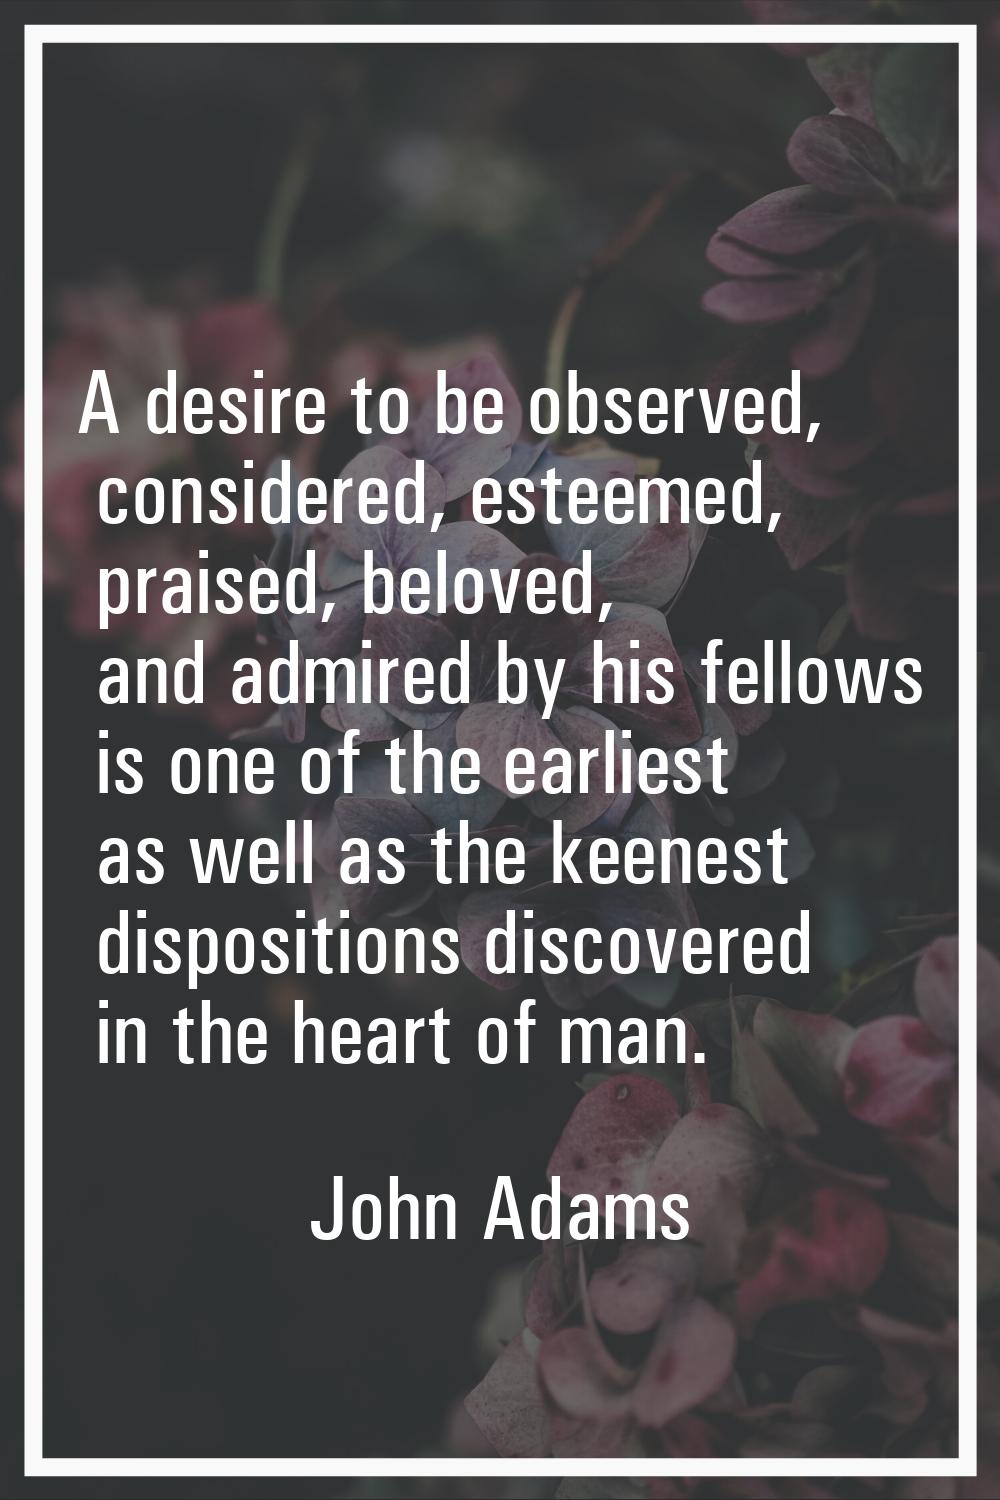 A desire to be observed, considered, esteemed, praised, beloved, and admired by his fellows is one 